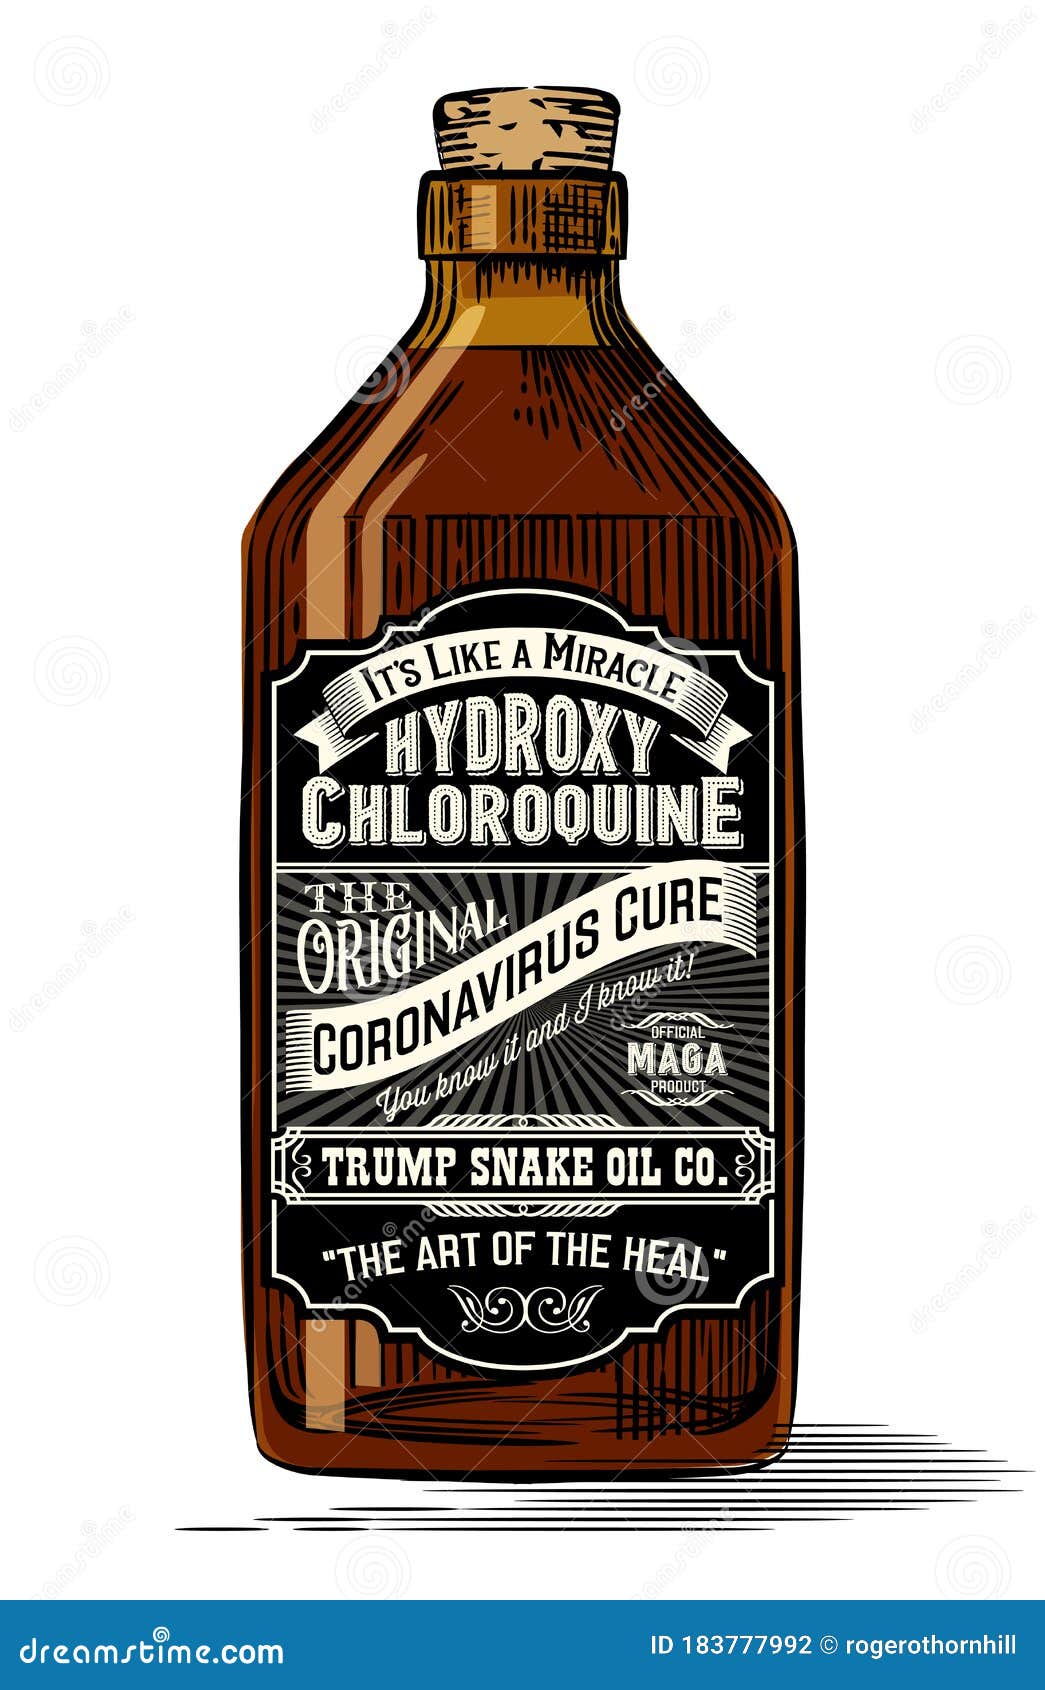 old medicine bottle with vintage label for hydroxychloroquine as a cure for coronavirus.